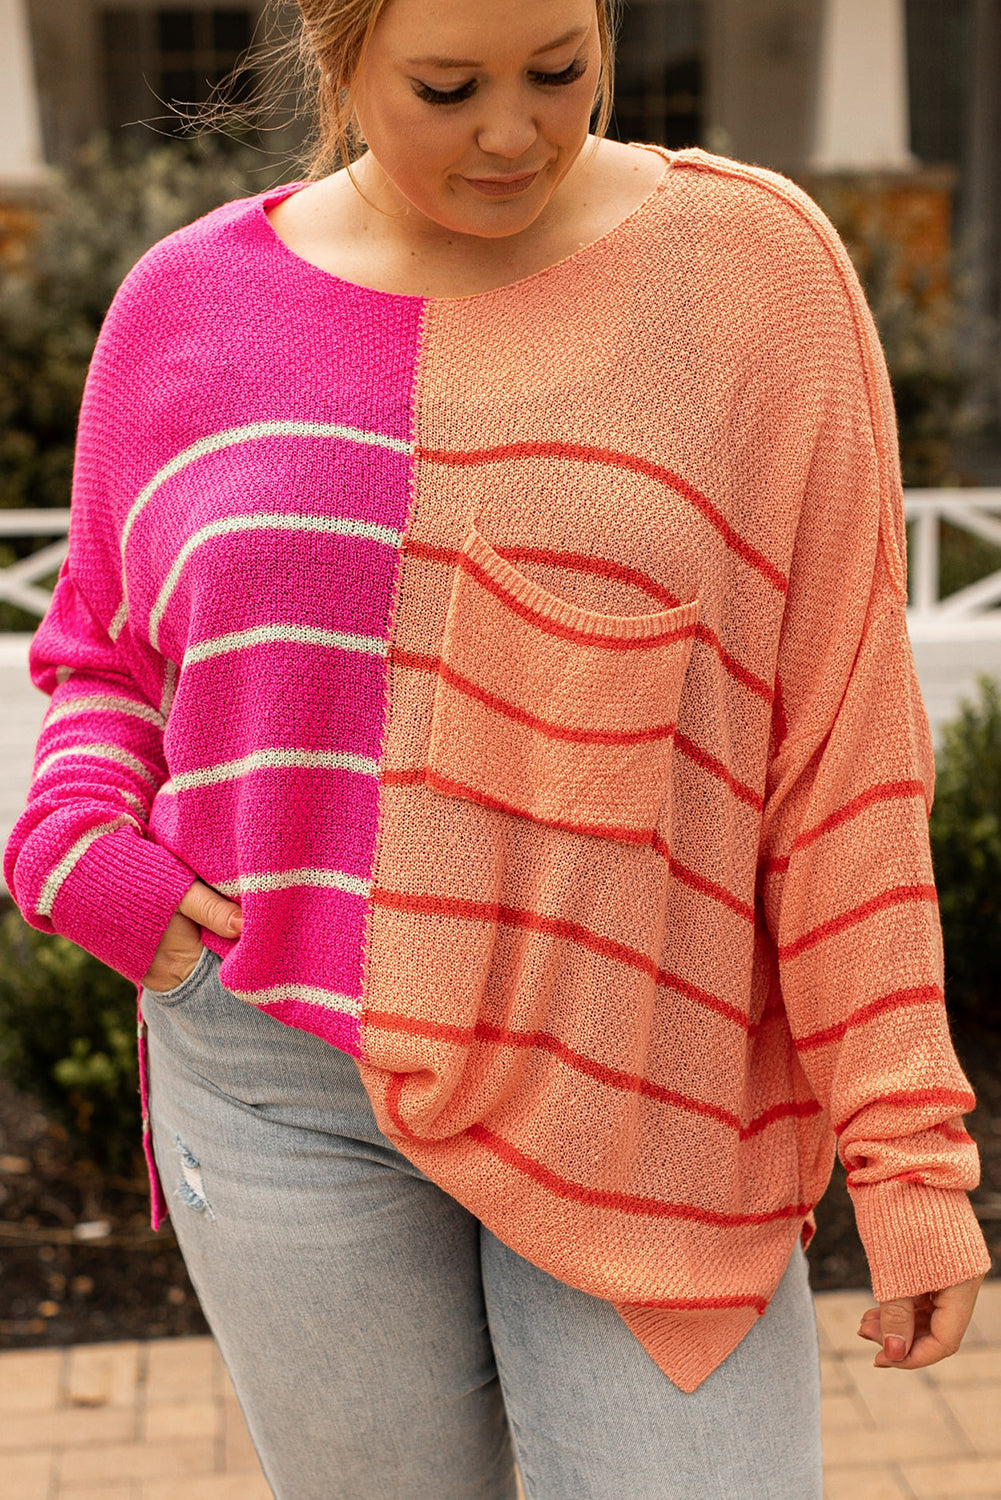 Yellow Plus Size Color Block Striped Patchwork Knit Sweater